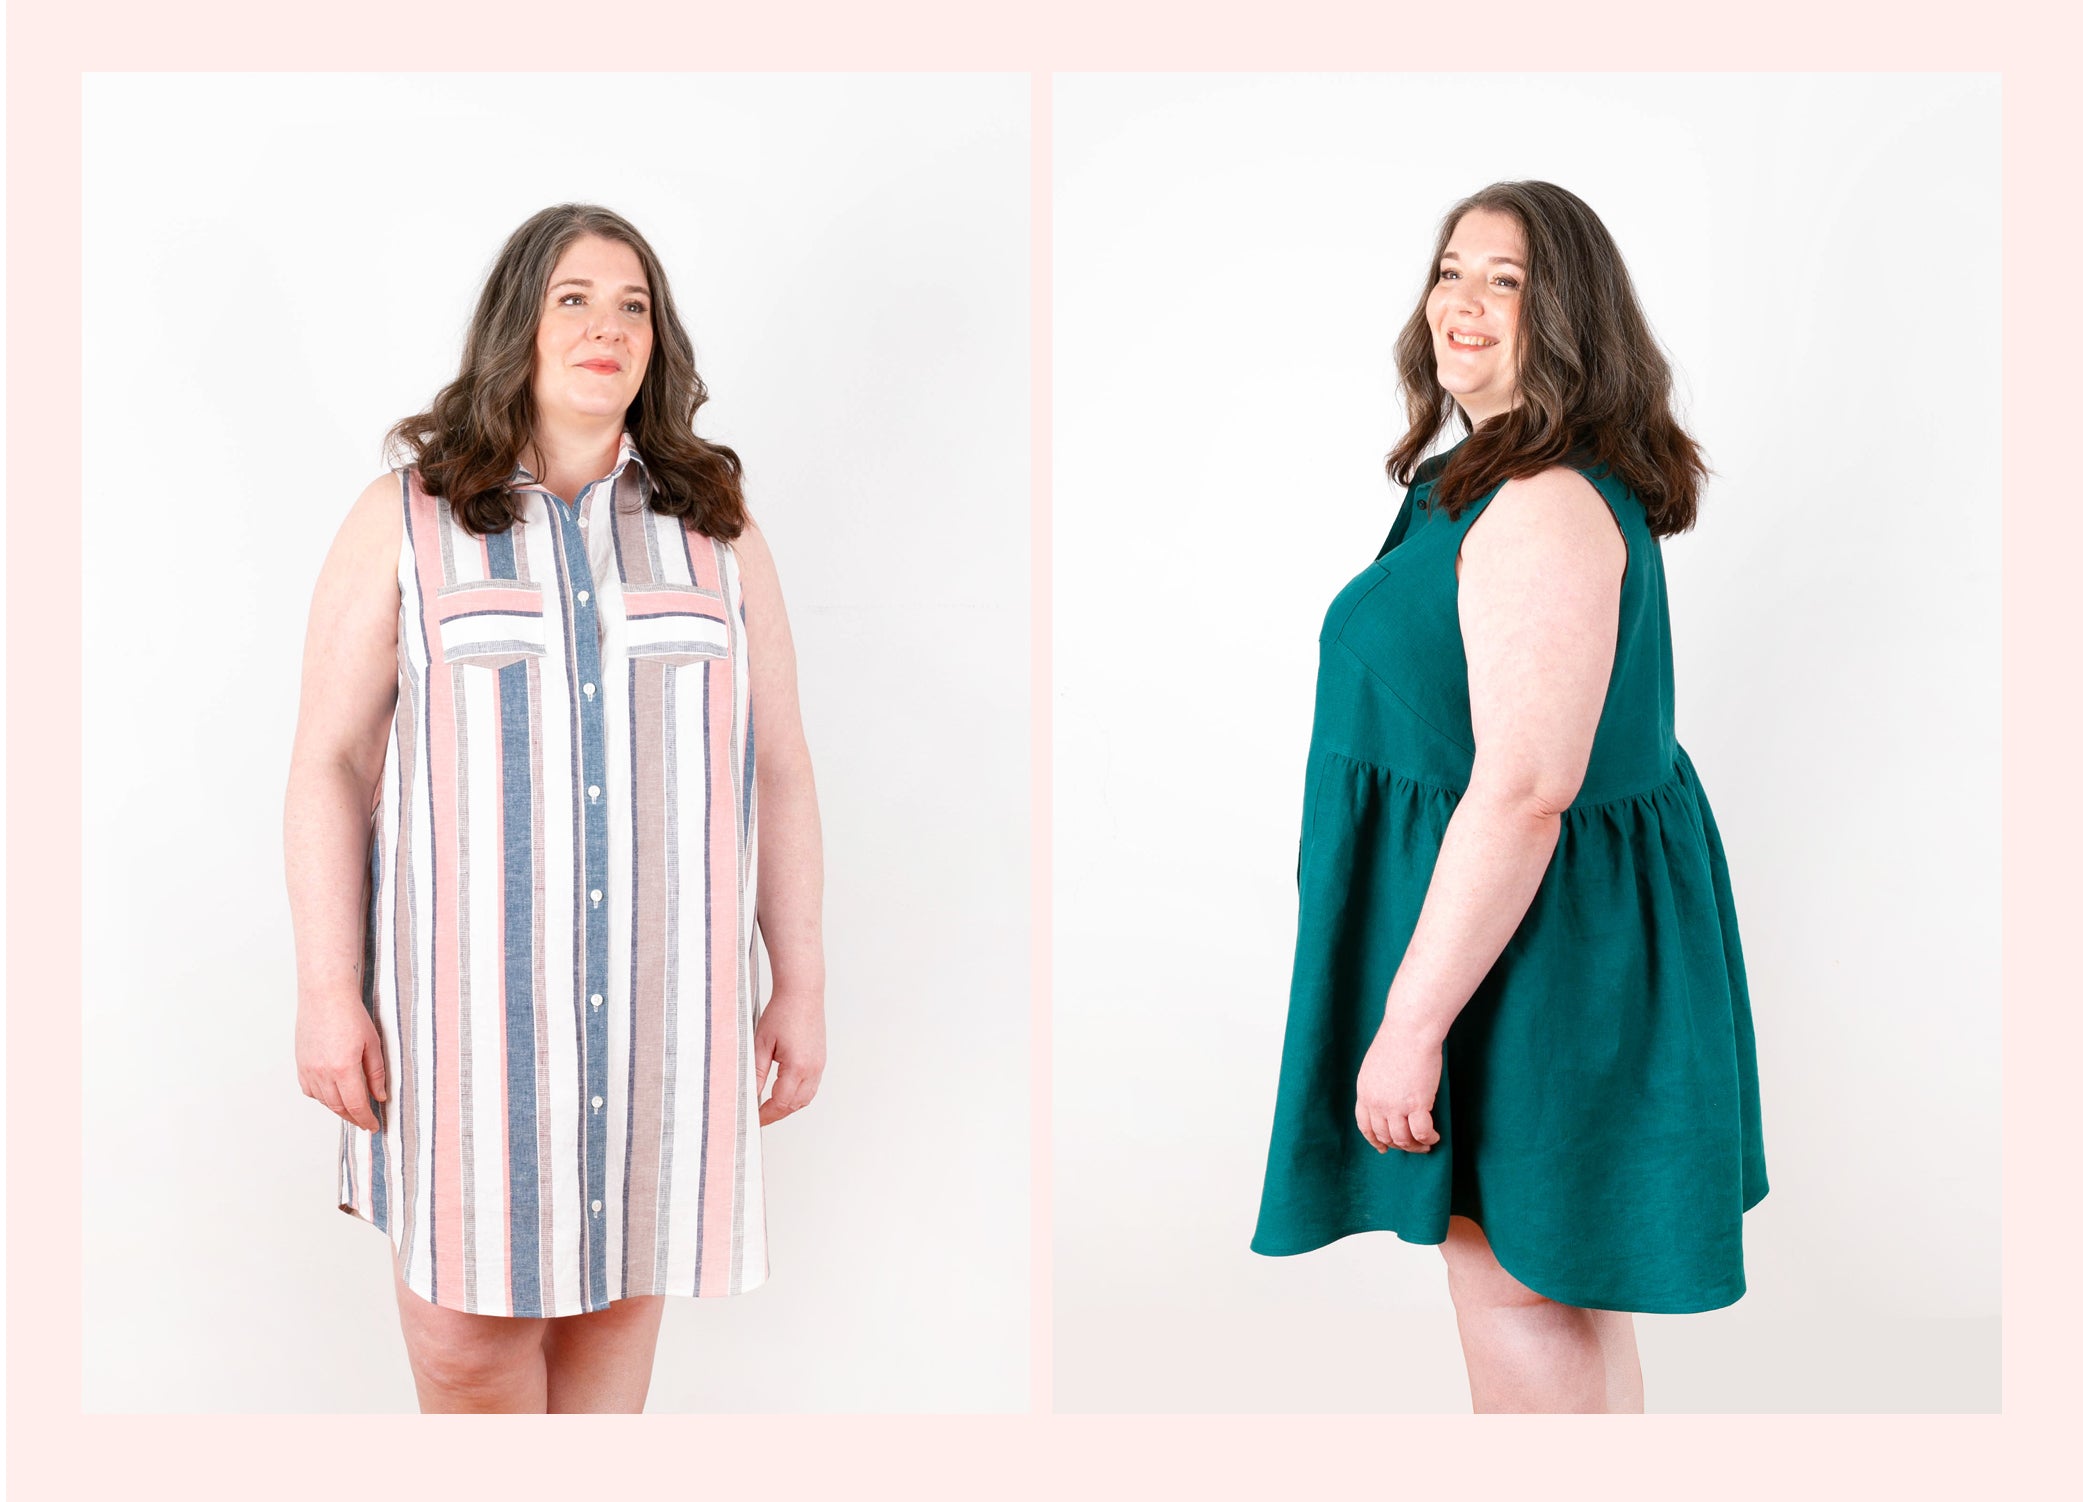 Plus Size Clothing for Women in Sizes 14-32